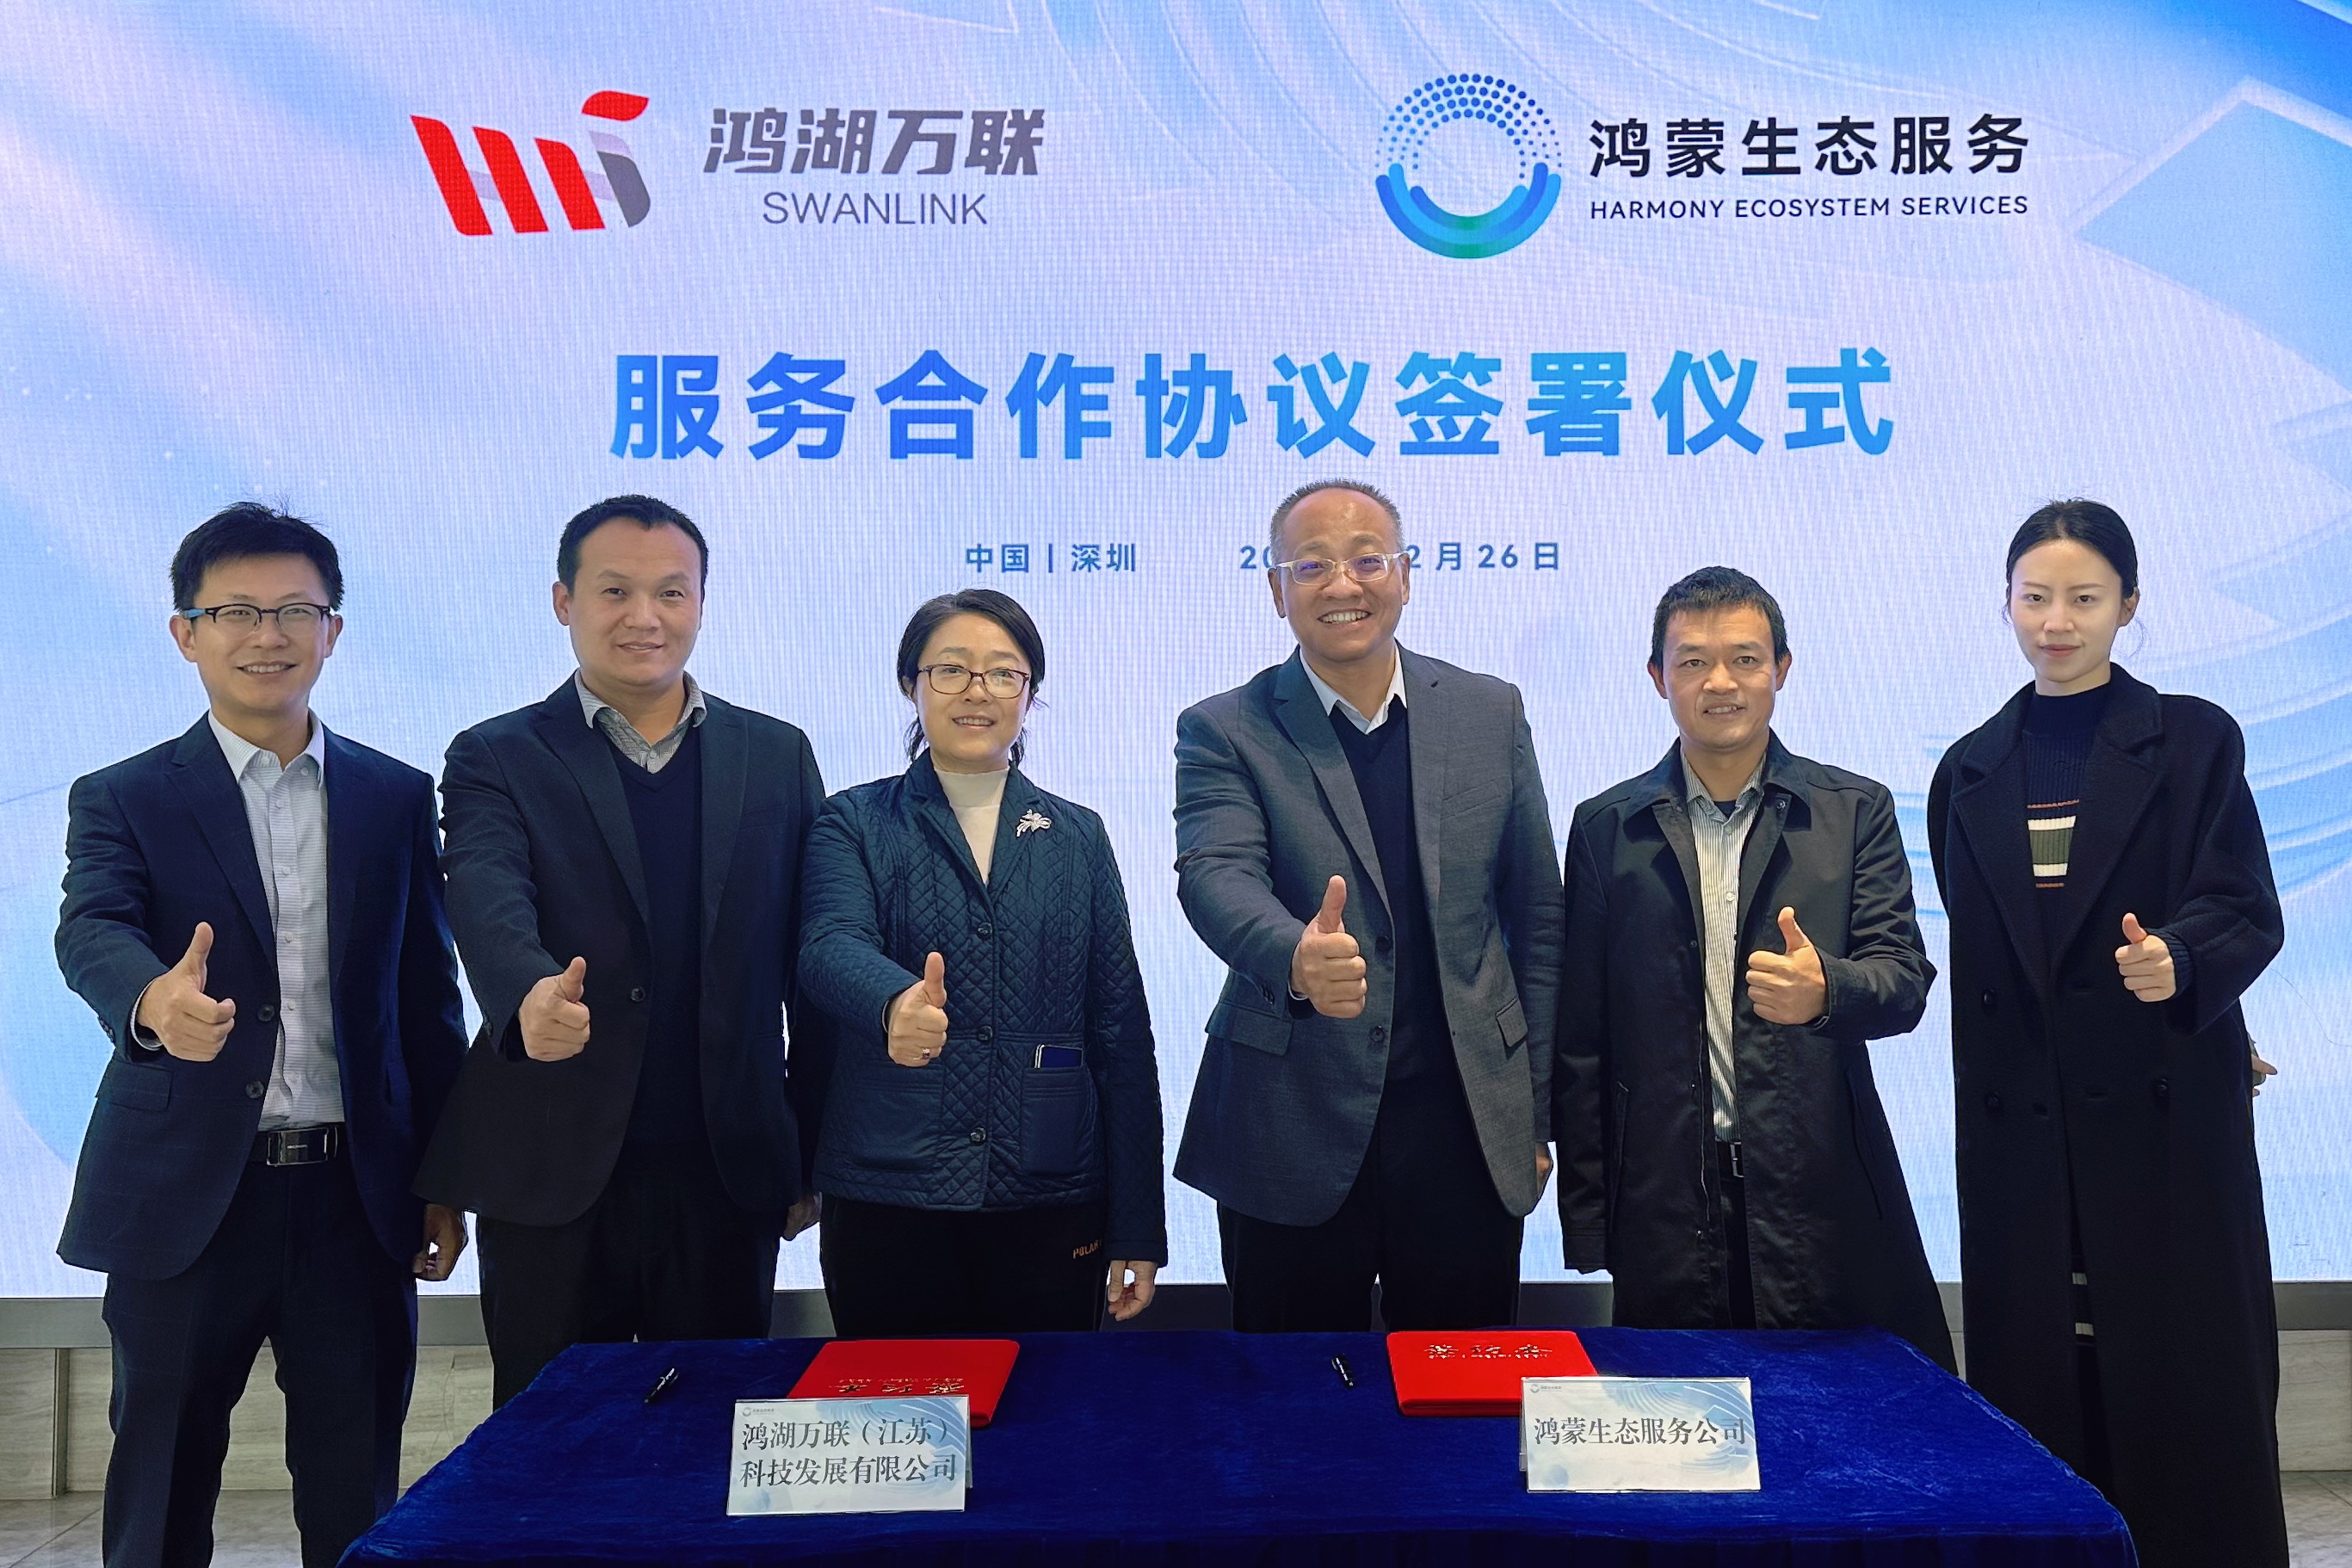 Co-Creating a New Chapter in Open Source - iSoftStone Subsidiary SwanLink Signs Strategic Cooperation Agreement with Harmony Ecosystem Services Company